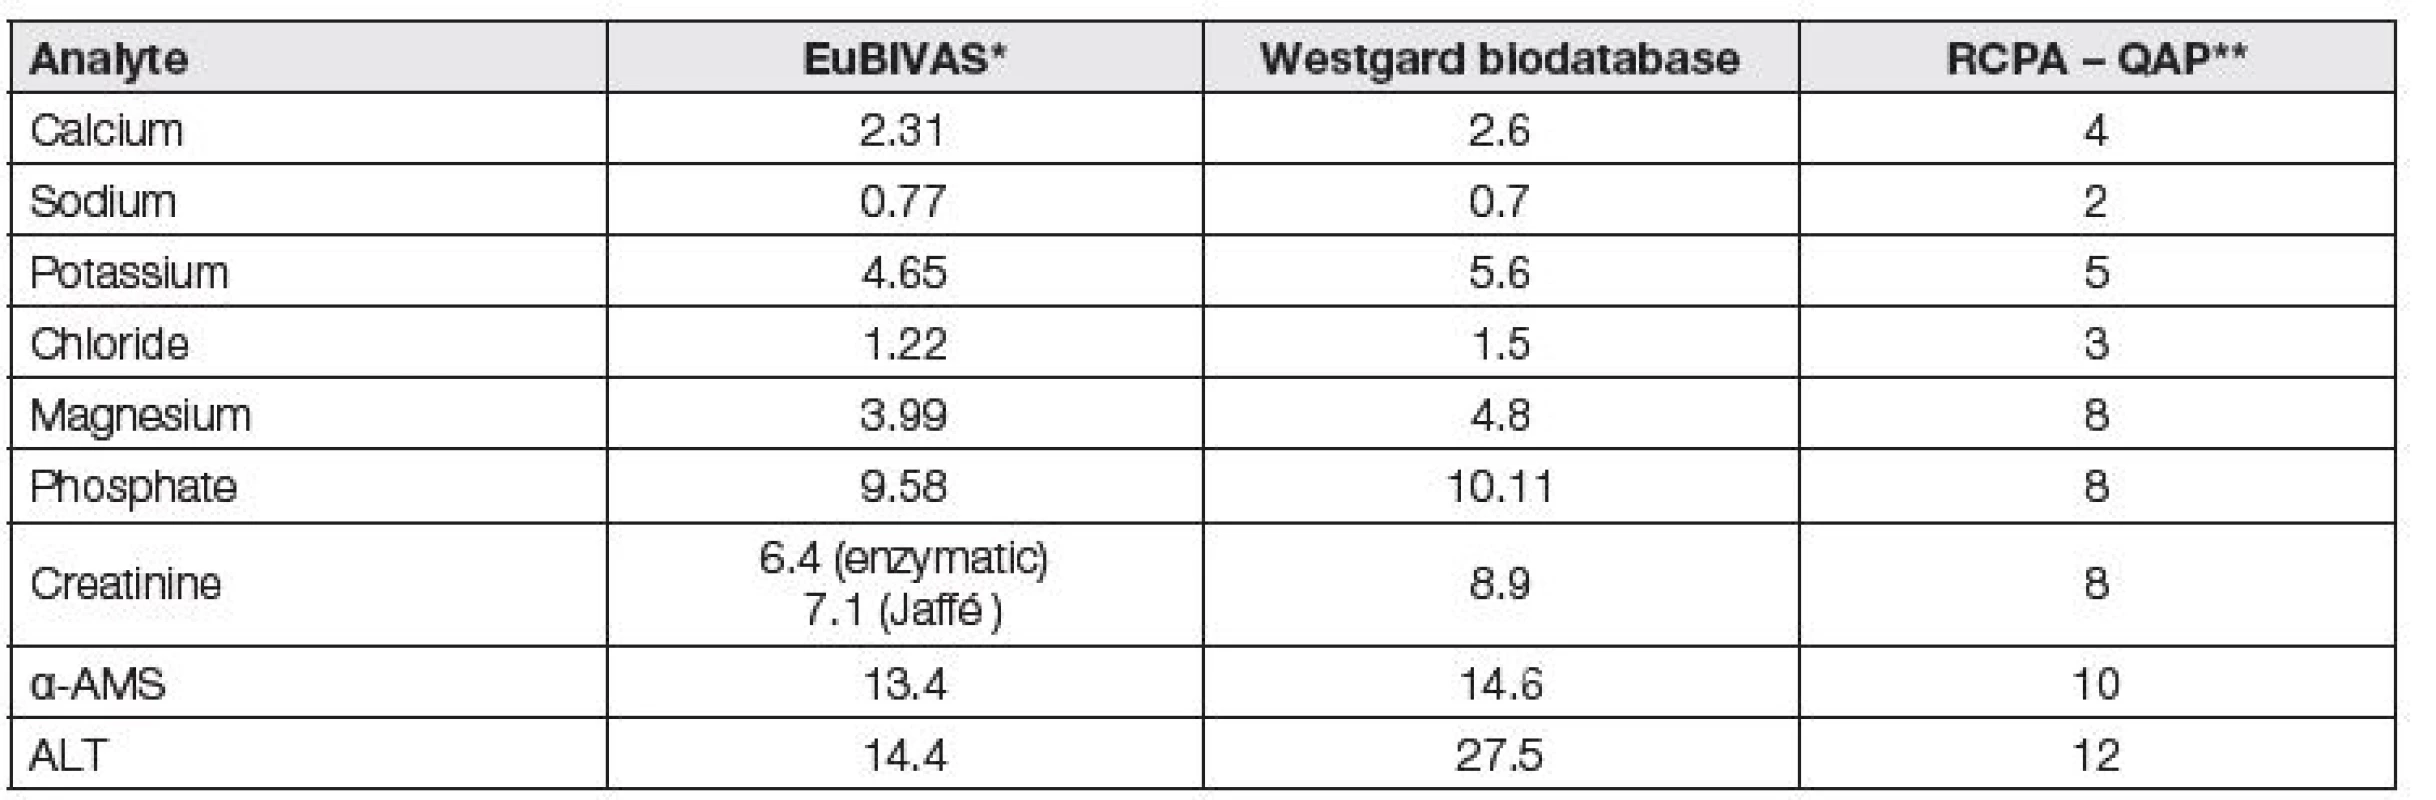 Control limits (here as APSTE) derived from biological variation obtained in study EuBIVAS, comparized with Westgard
TE values (Westgard biodatabase) and with RCPA – QAP allowable limits of performance, all data are in %